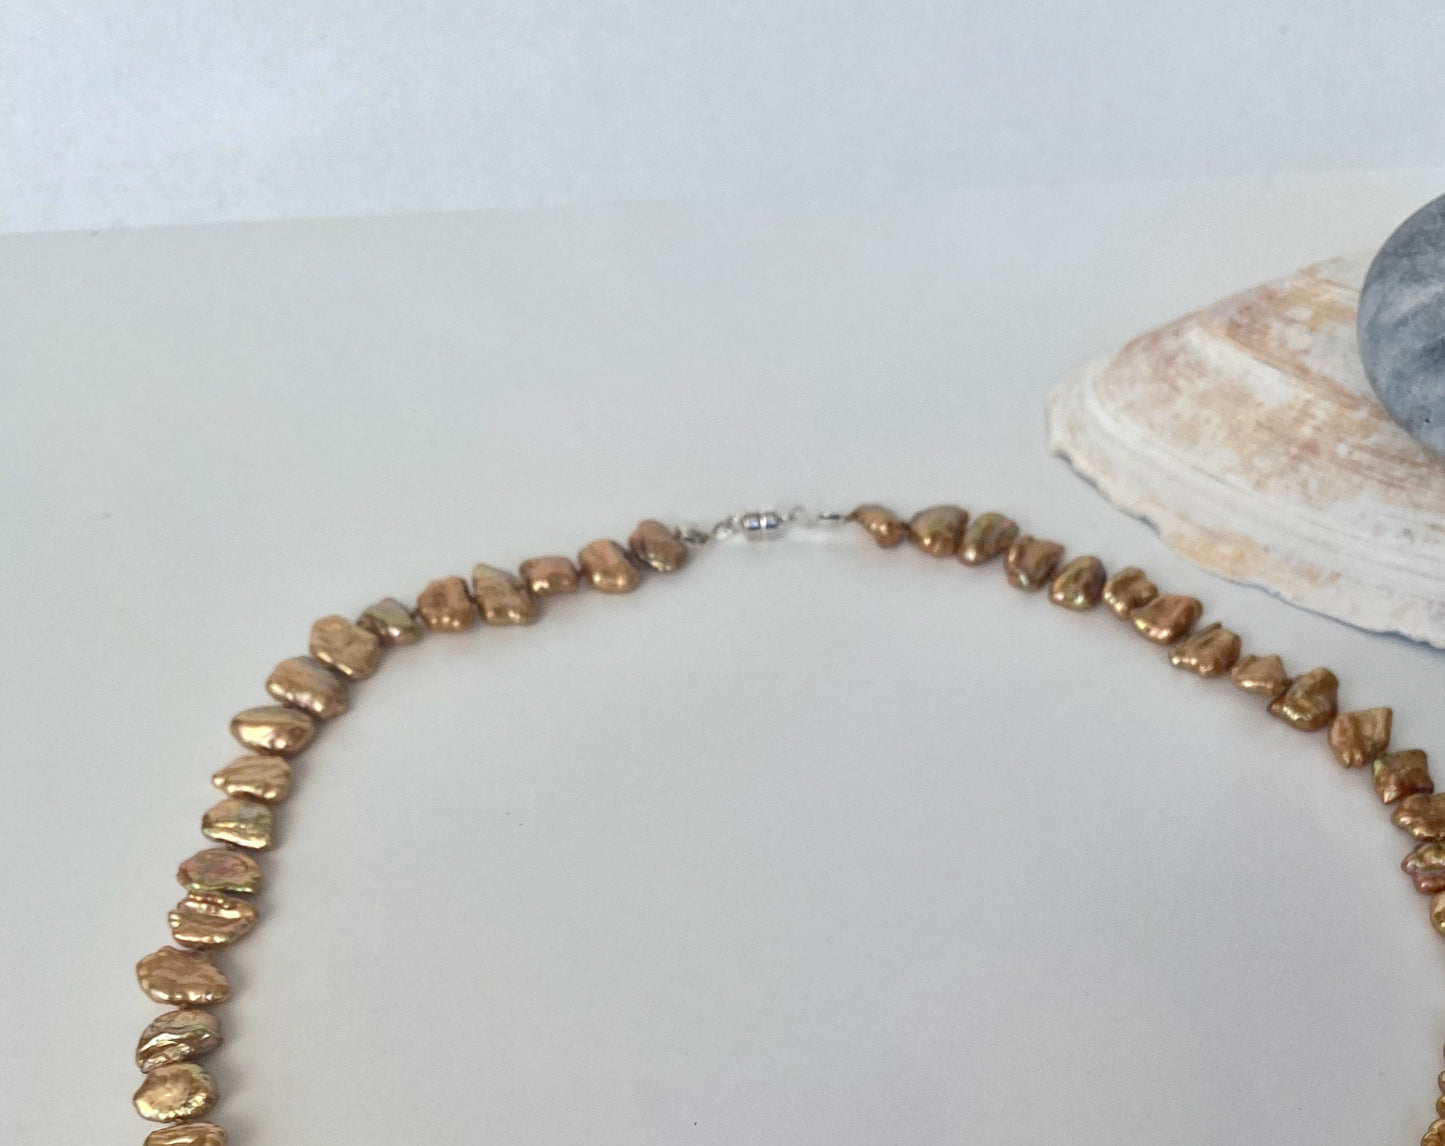 Pearls. Beautiful gold/bronze chip knotted fresh water pearl necklace. The necklace is finished with a quality sterling silver magnetic  clasp.